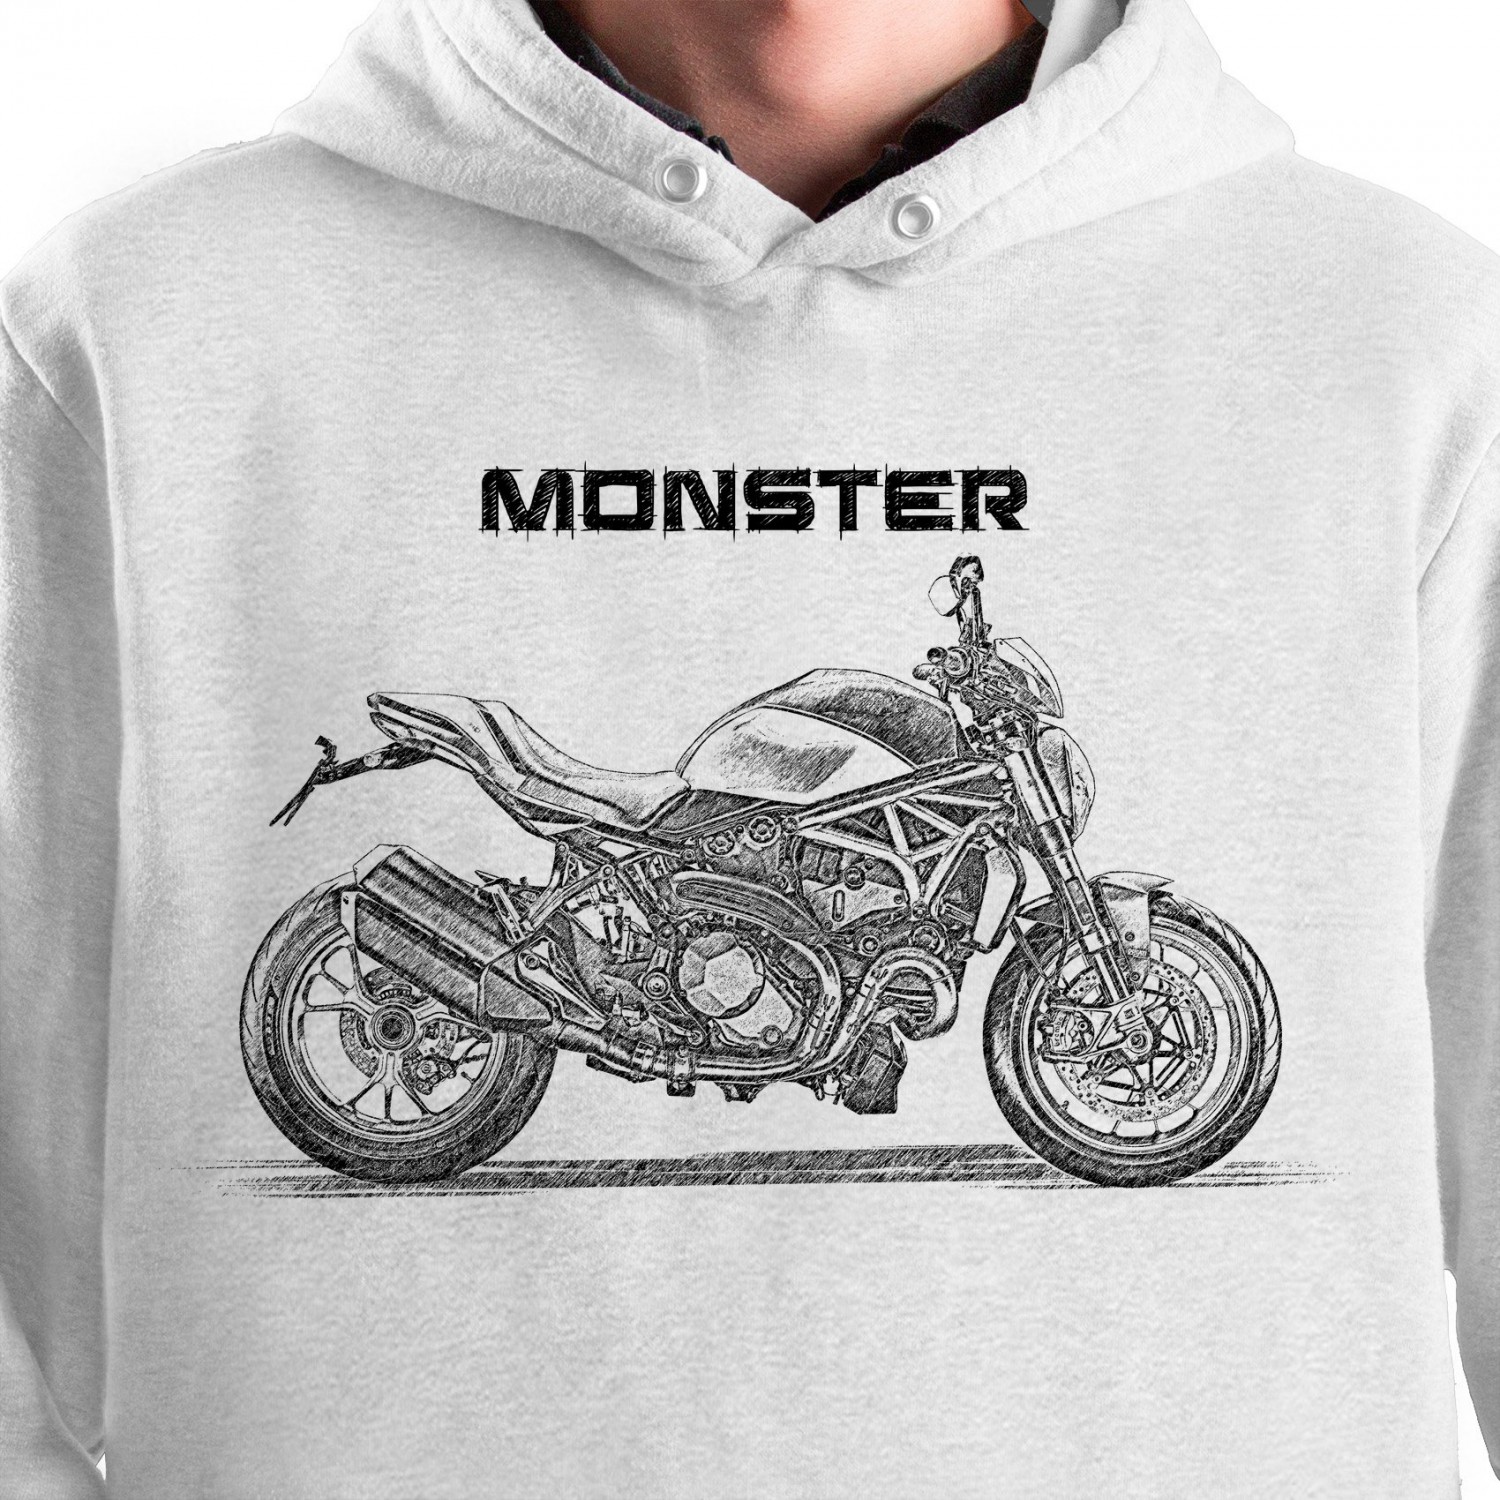 White T-shirt with Ducati Monster 1200. Gift for motorcyclist.